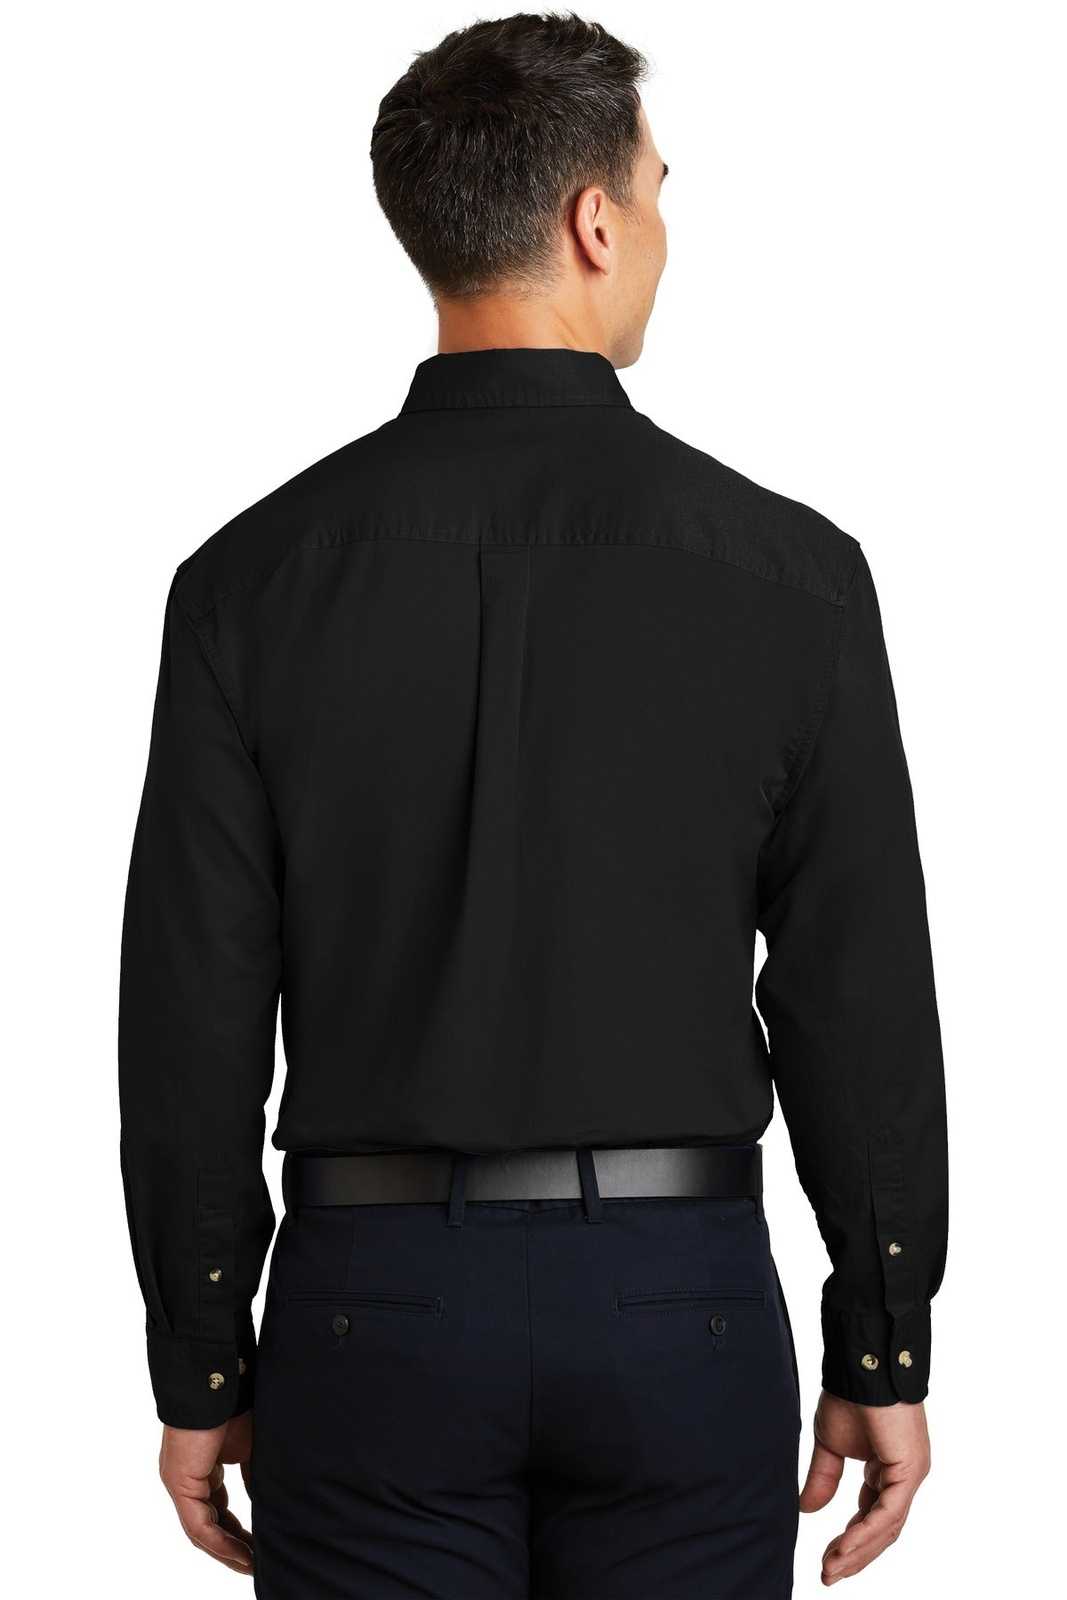 Port Authority S600T Long Sleeve Twill Shirt - Black - HIT a Double - 1